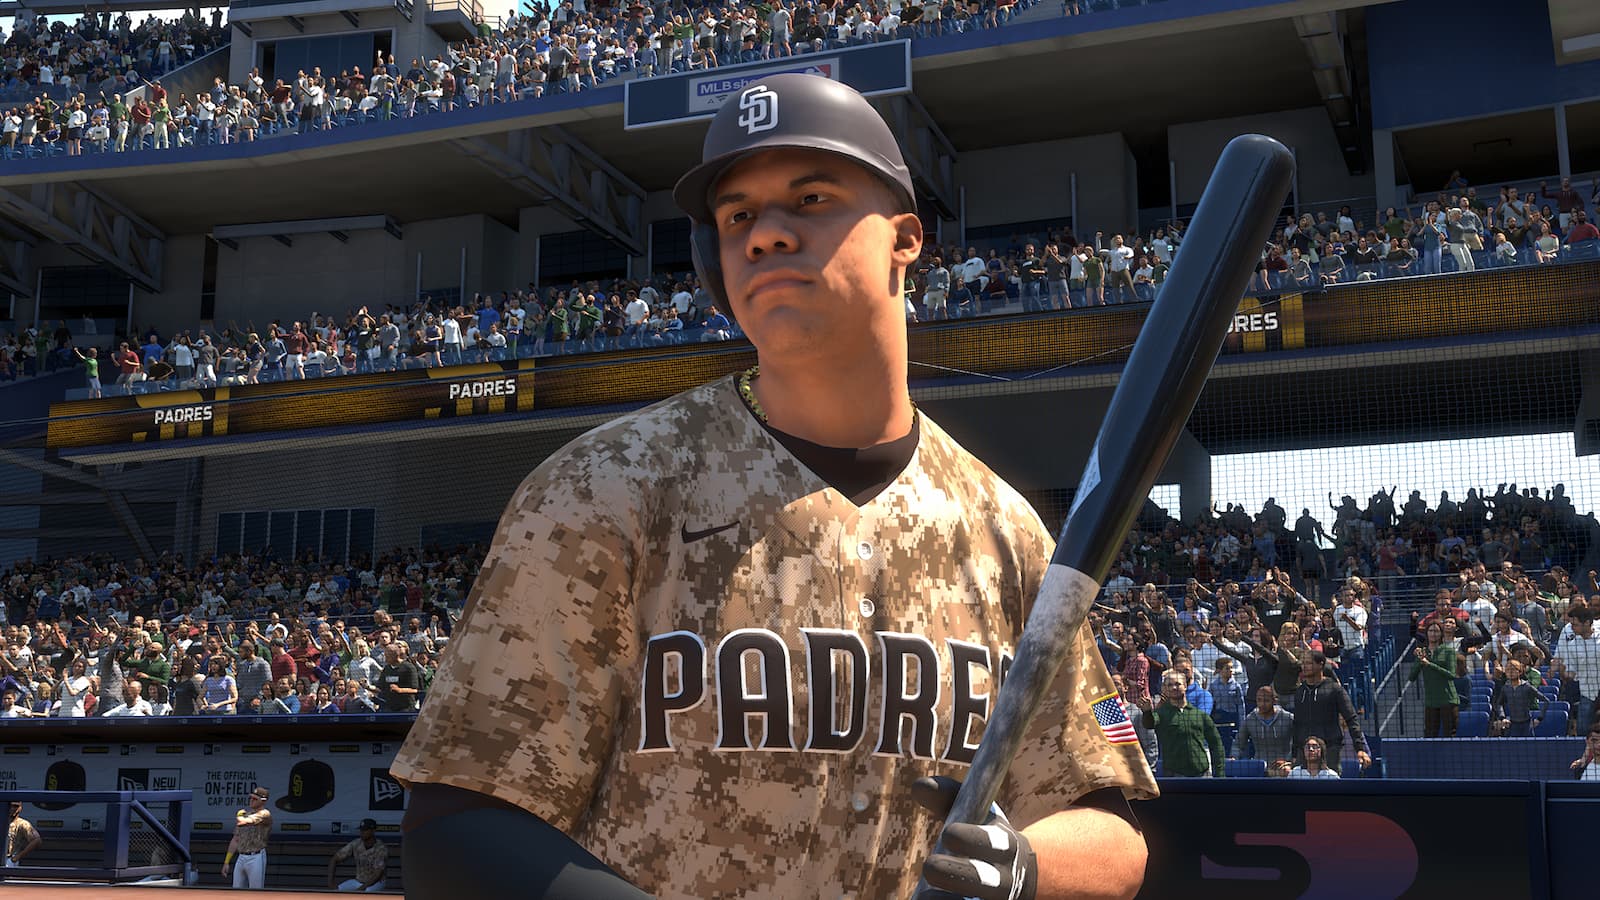 MLB The Show 23 Tournaments Launched! Join The $5,000 Launch Cup Now 